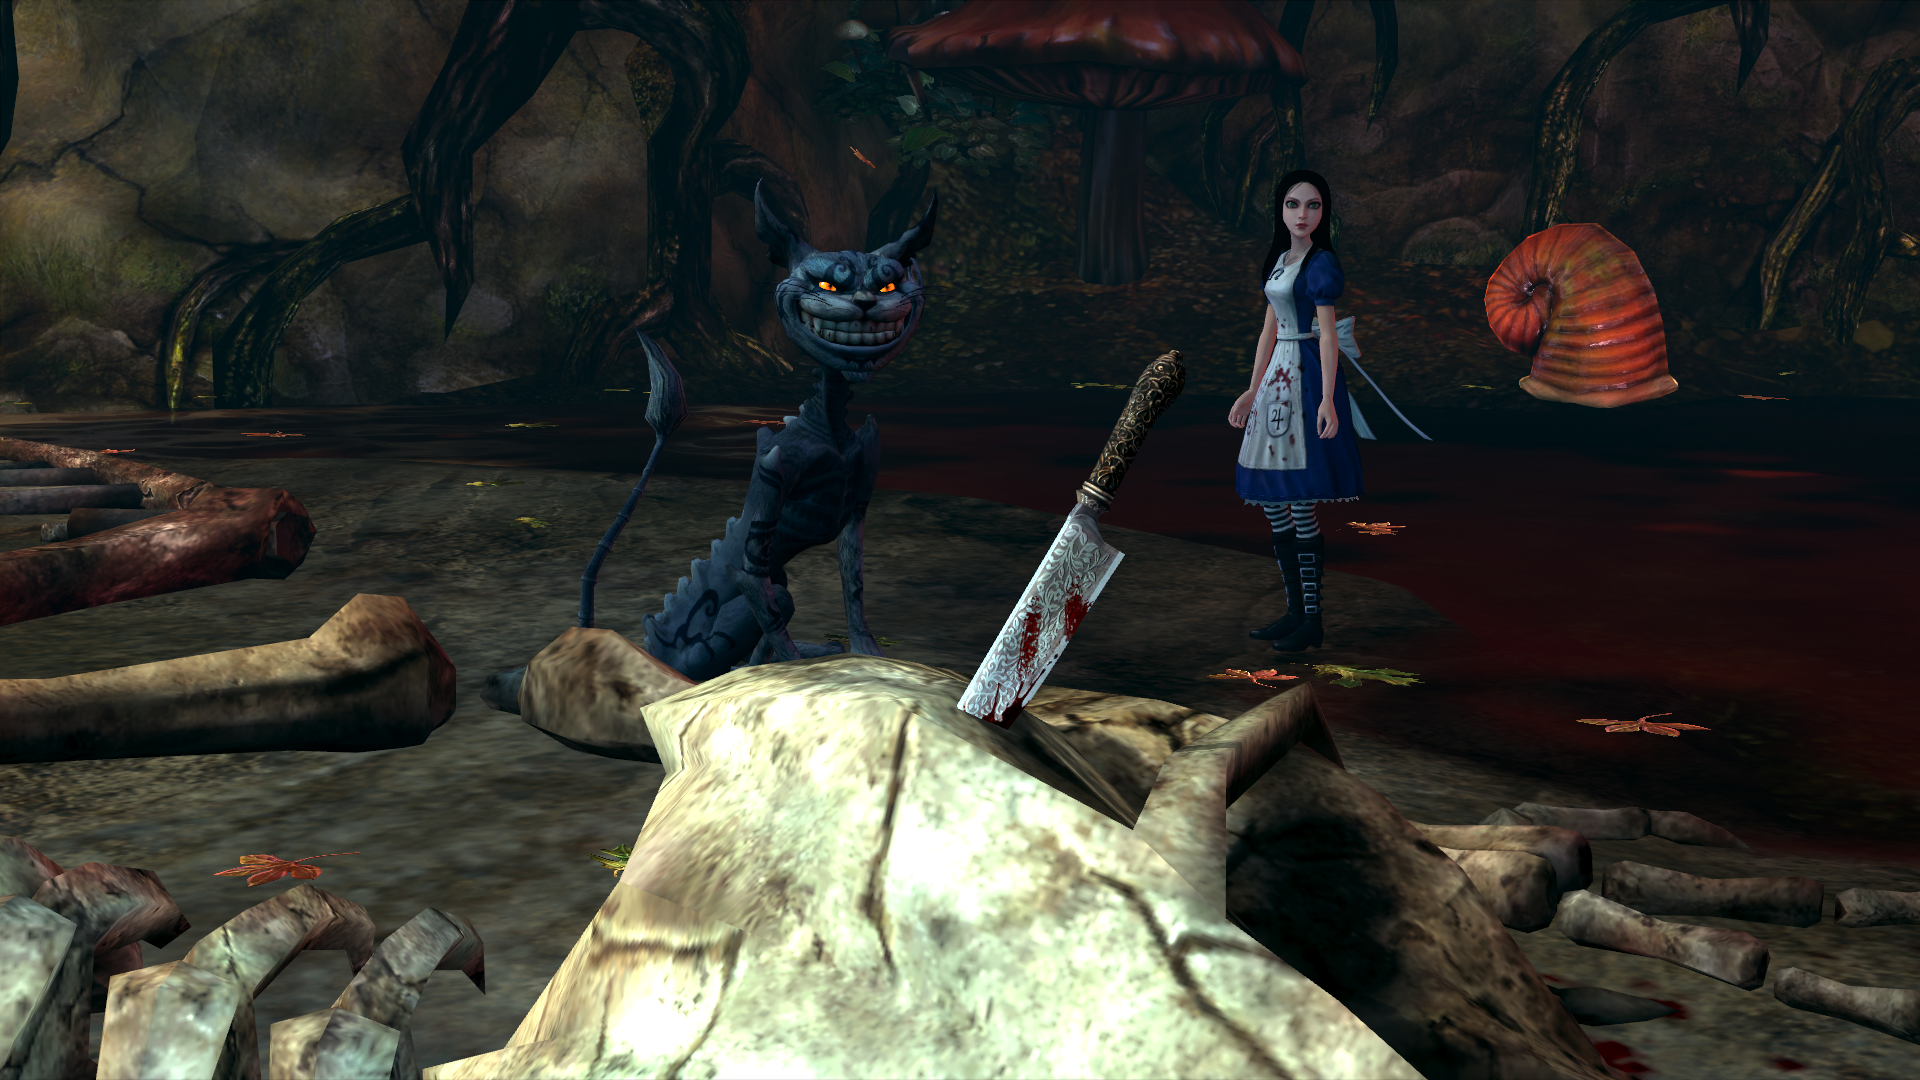 Alice Madness Returns Is Vorpal Blade Poster Picture Room Home